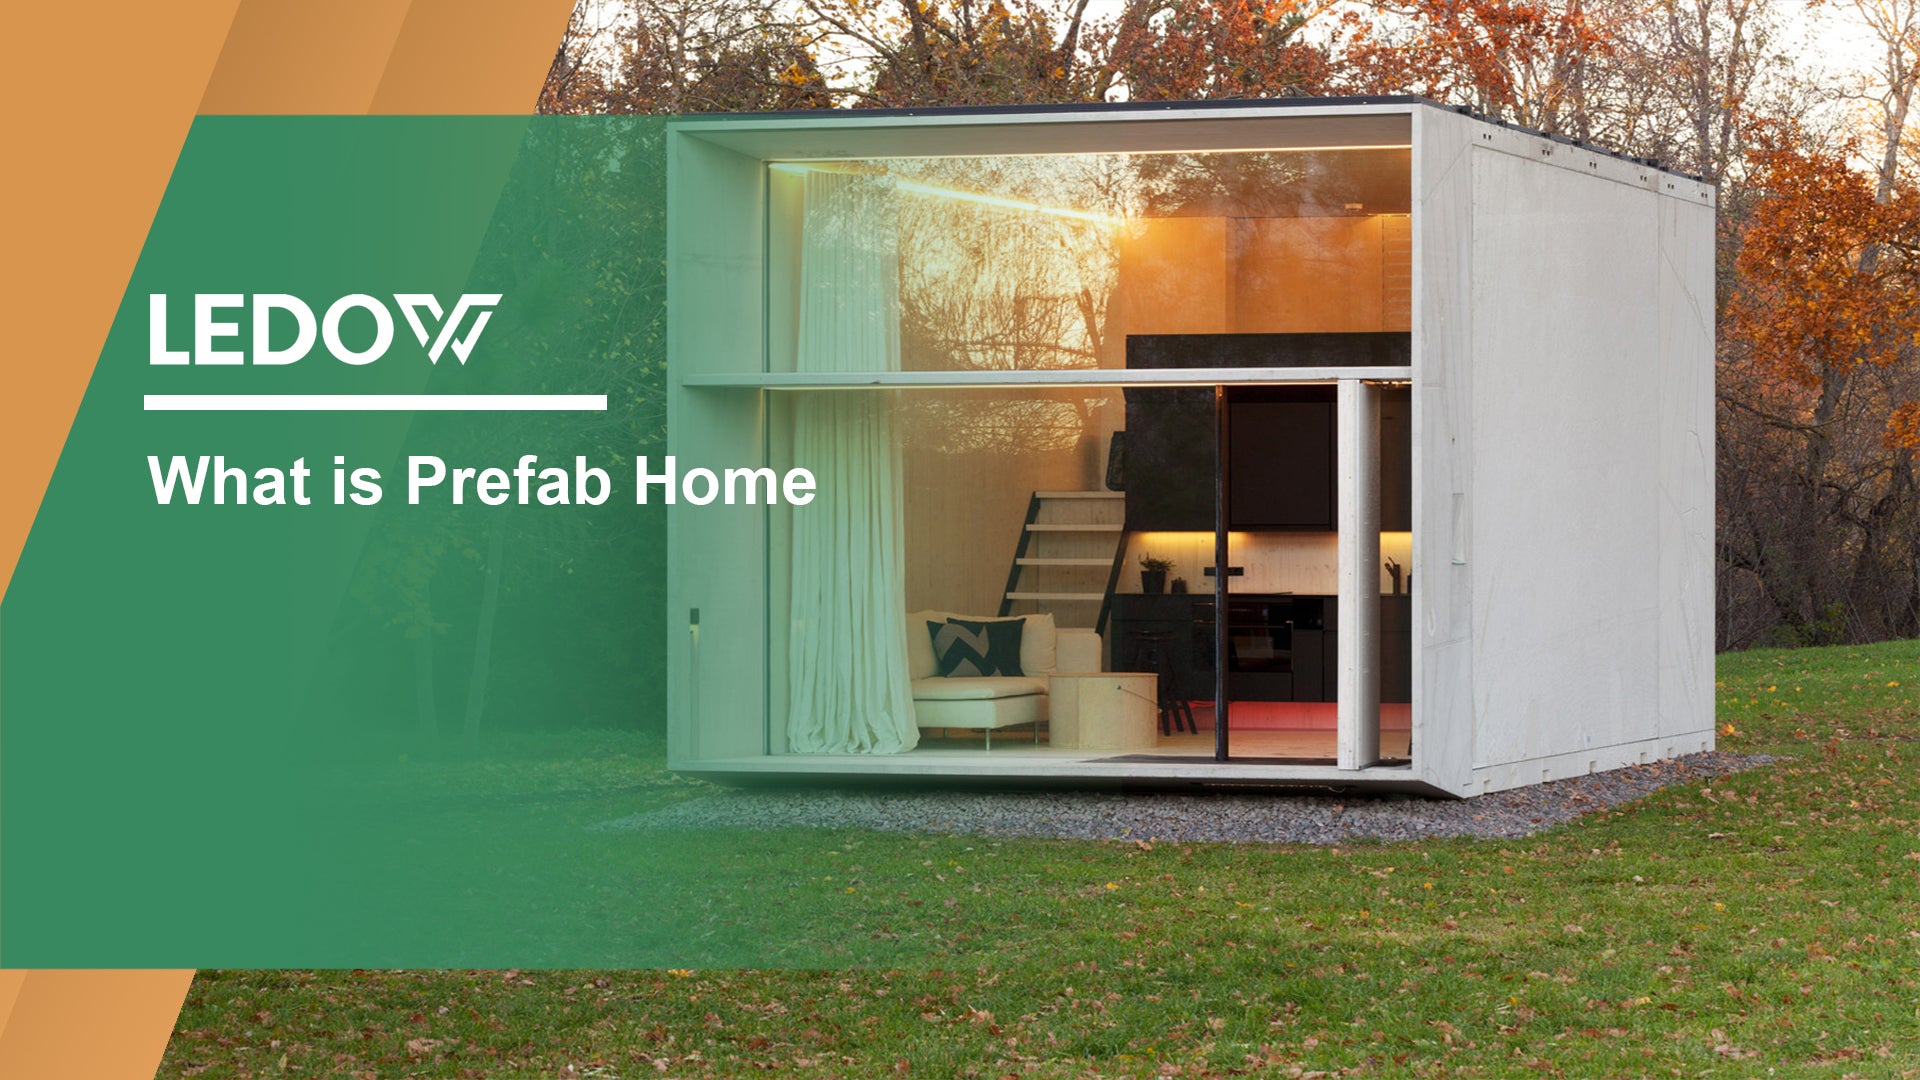 What is Prefab Home?